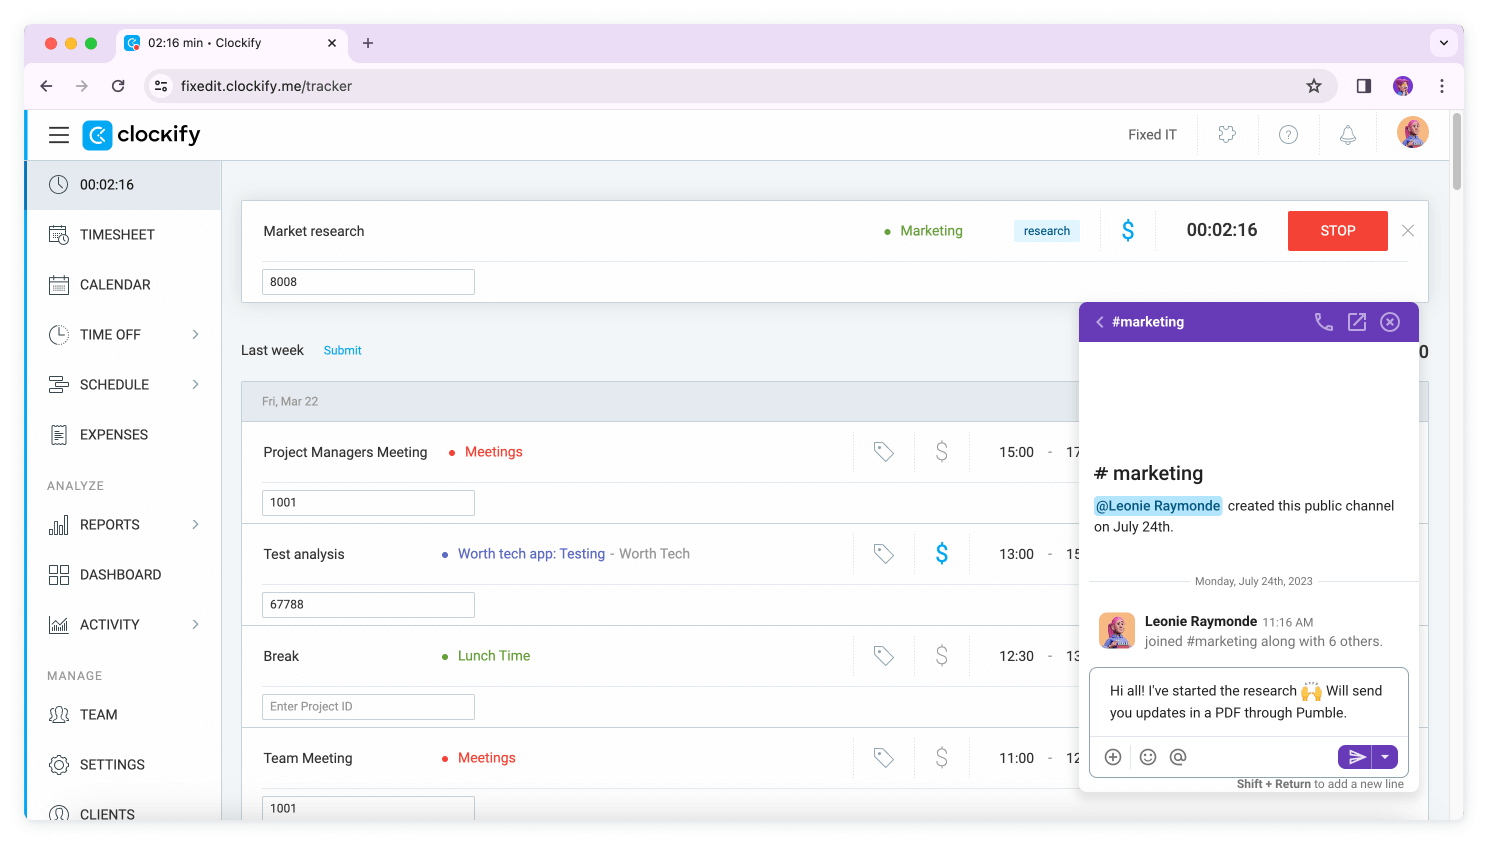 Chat with your team directly in Clockify